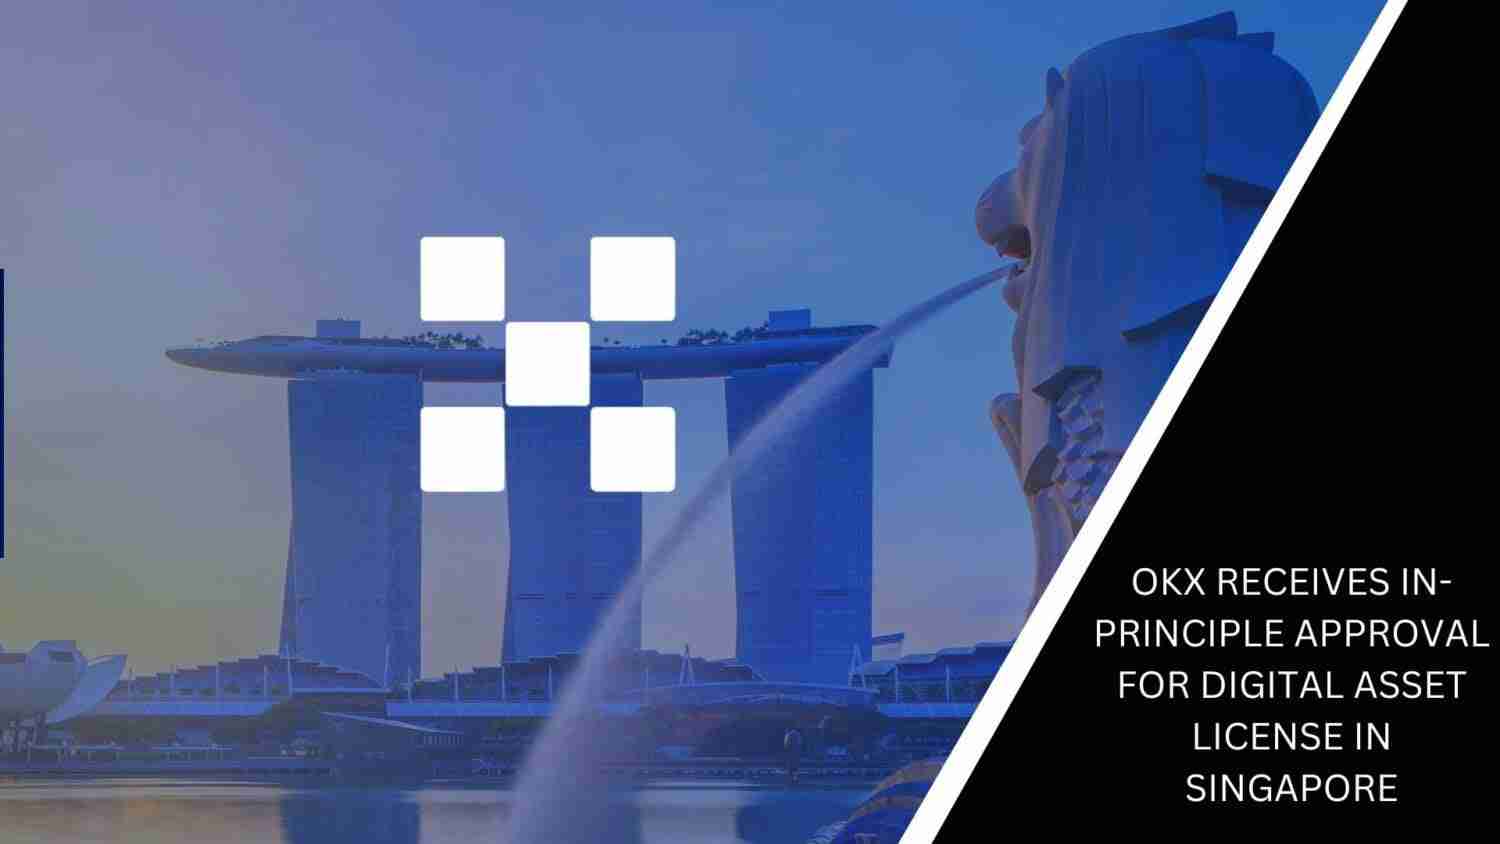 OKX Receives In-Principle Approval for Digital Asset License in Singapore